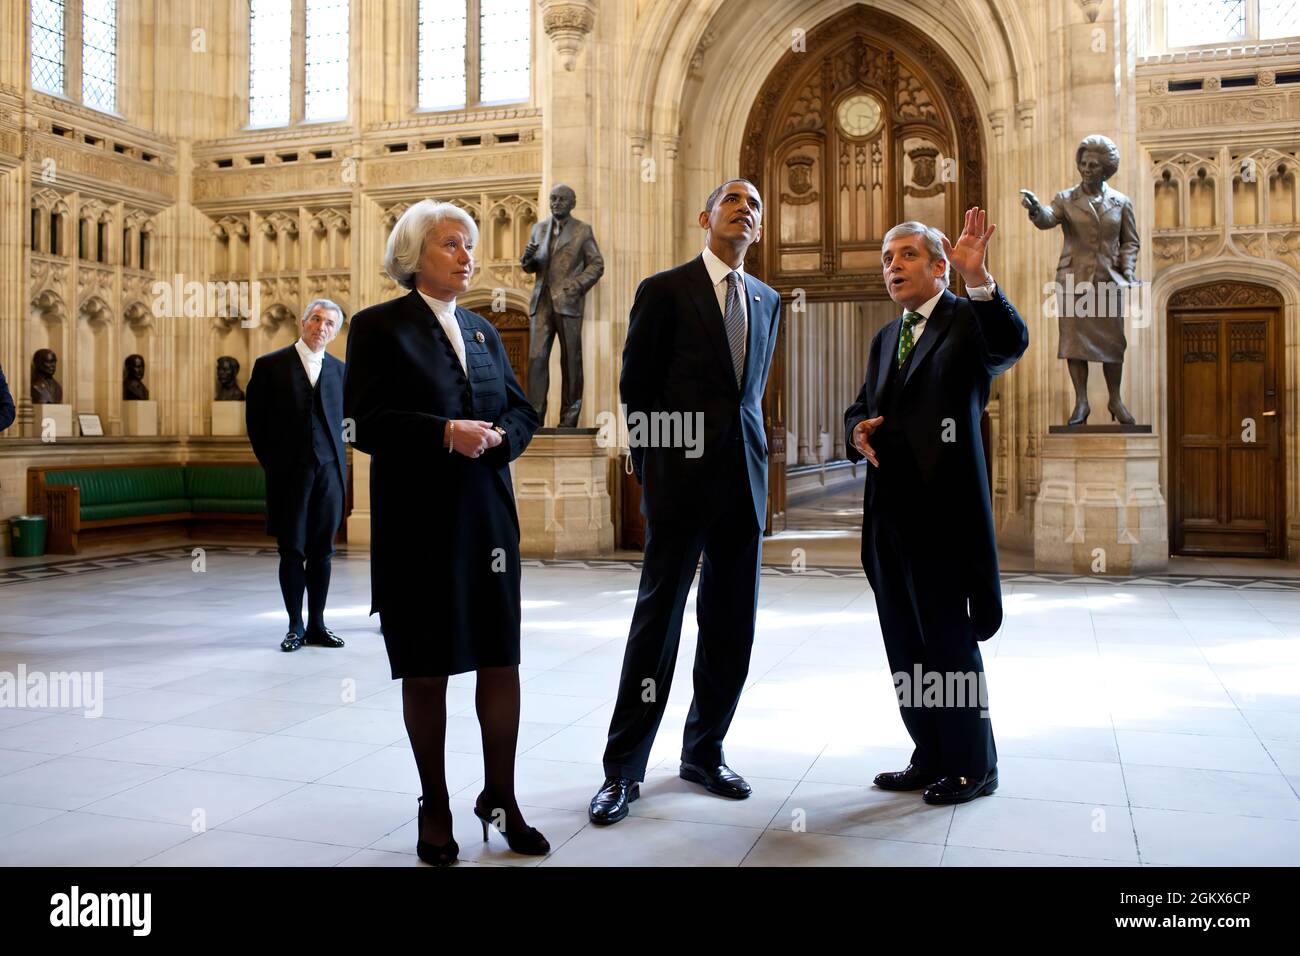 President Barack Obama tours the House of Commons Members' Lobby at Parliament in London, England, with Rt Hon John Bercow, Speaker of the House of Commons, and Rt Hon Baroness Hayman, Speaker of the House of Lords, May 25, 2011. (Official White House Photo by Pete Souza) This official White House photograph is being made available only for publication by news organizations and/or for personal use printing by the subject(s) of the photograph. The photograph may not be manipulated in any way and may not be used in commercial or political materials, advertisements, emails, products, promotions t Stock Photo